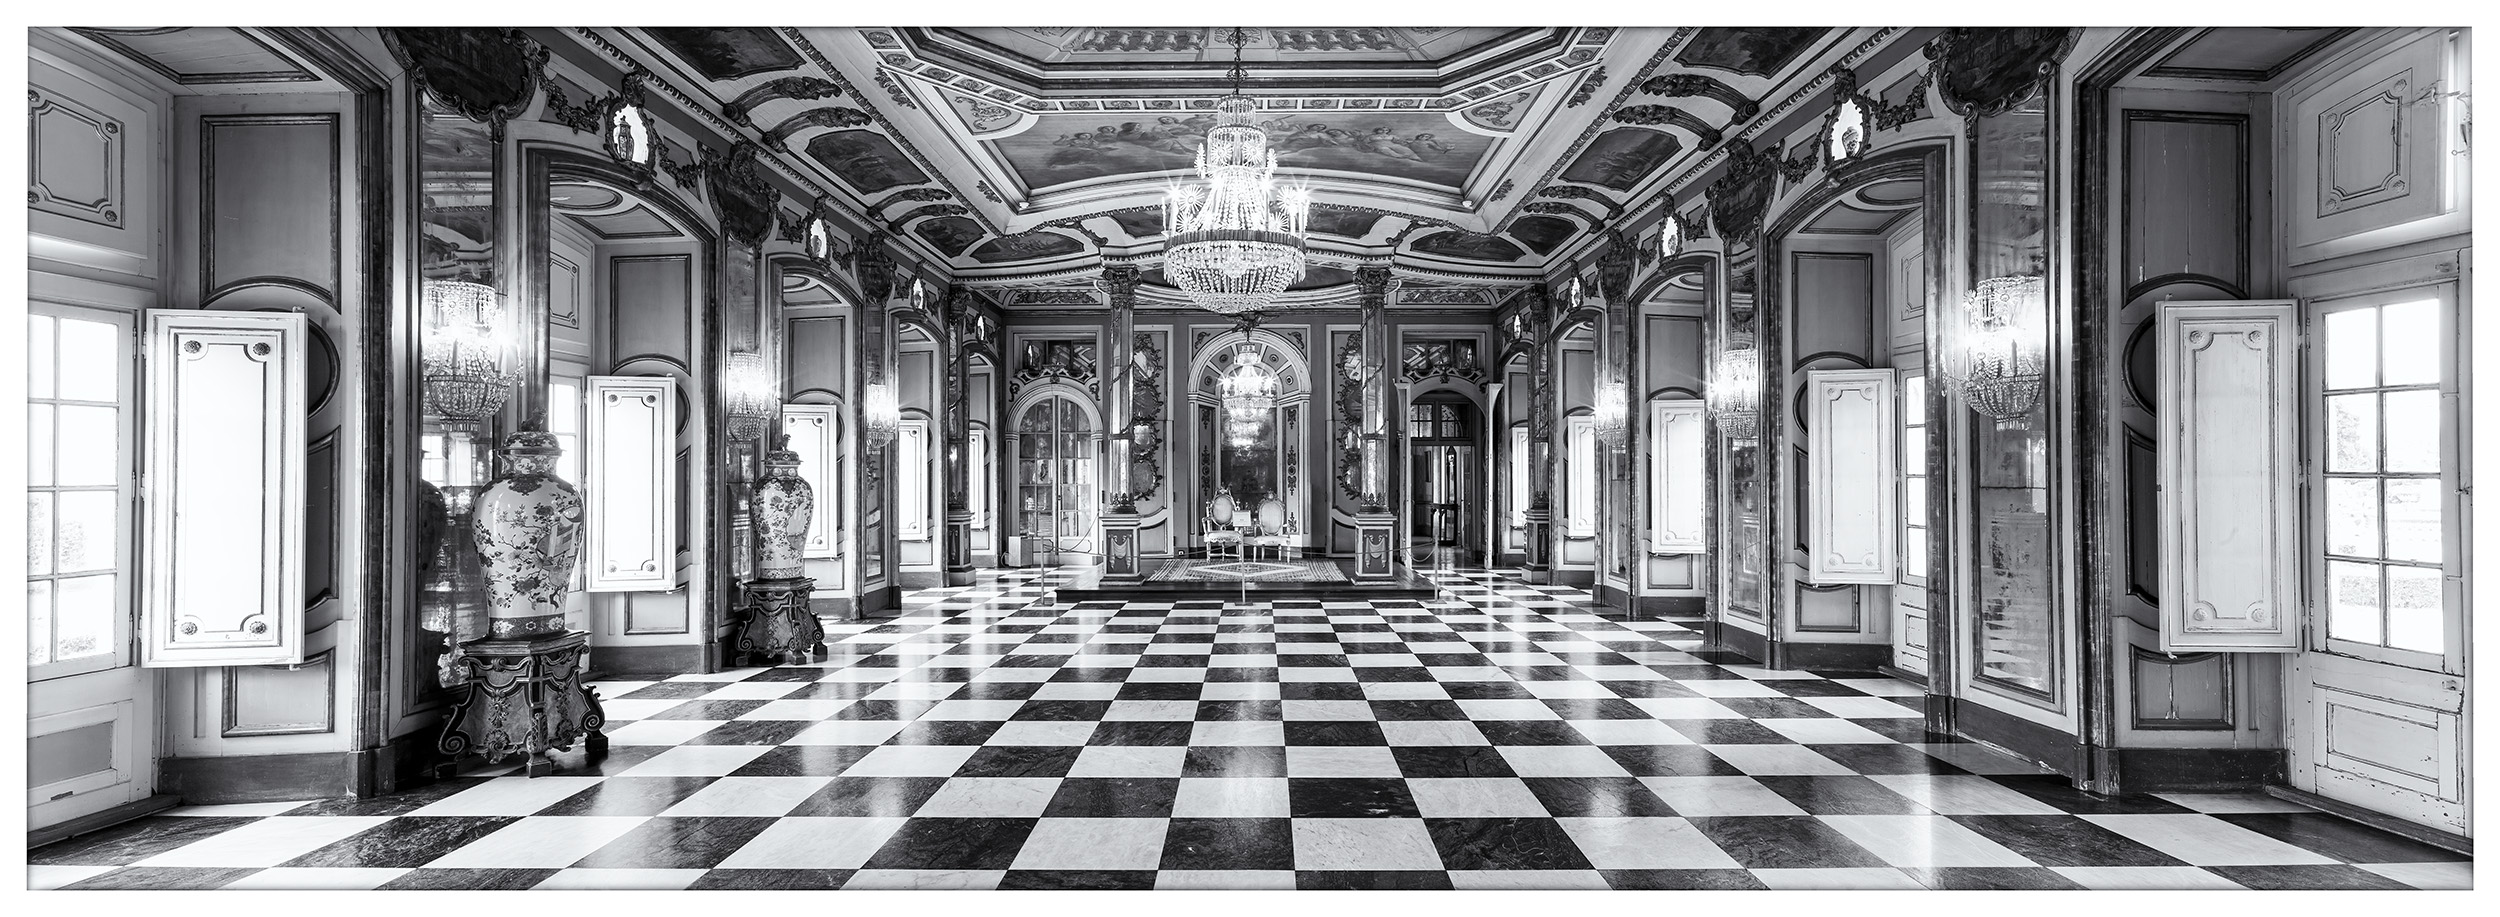 In Lisbon, Portugal, I captured this expansive black and white panoramic image within the Throne Room of Queluz Palace. The most...